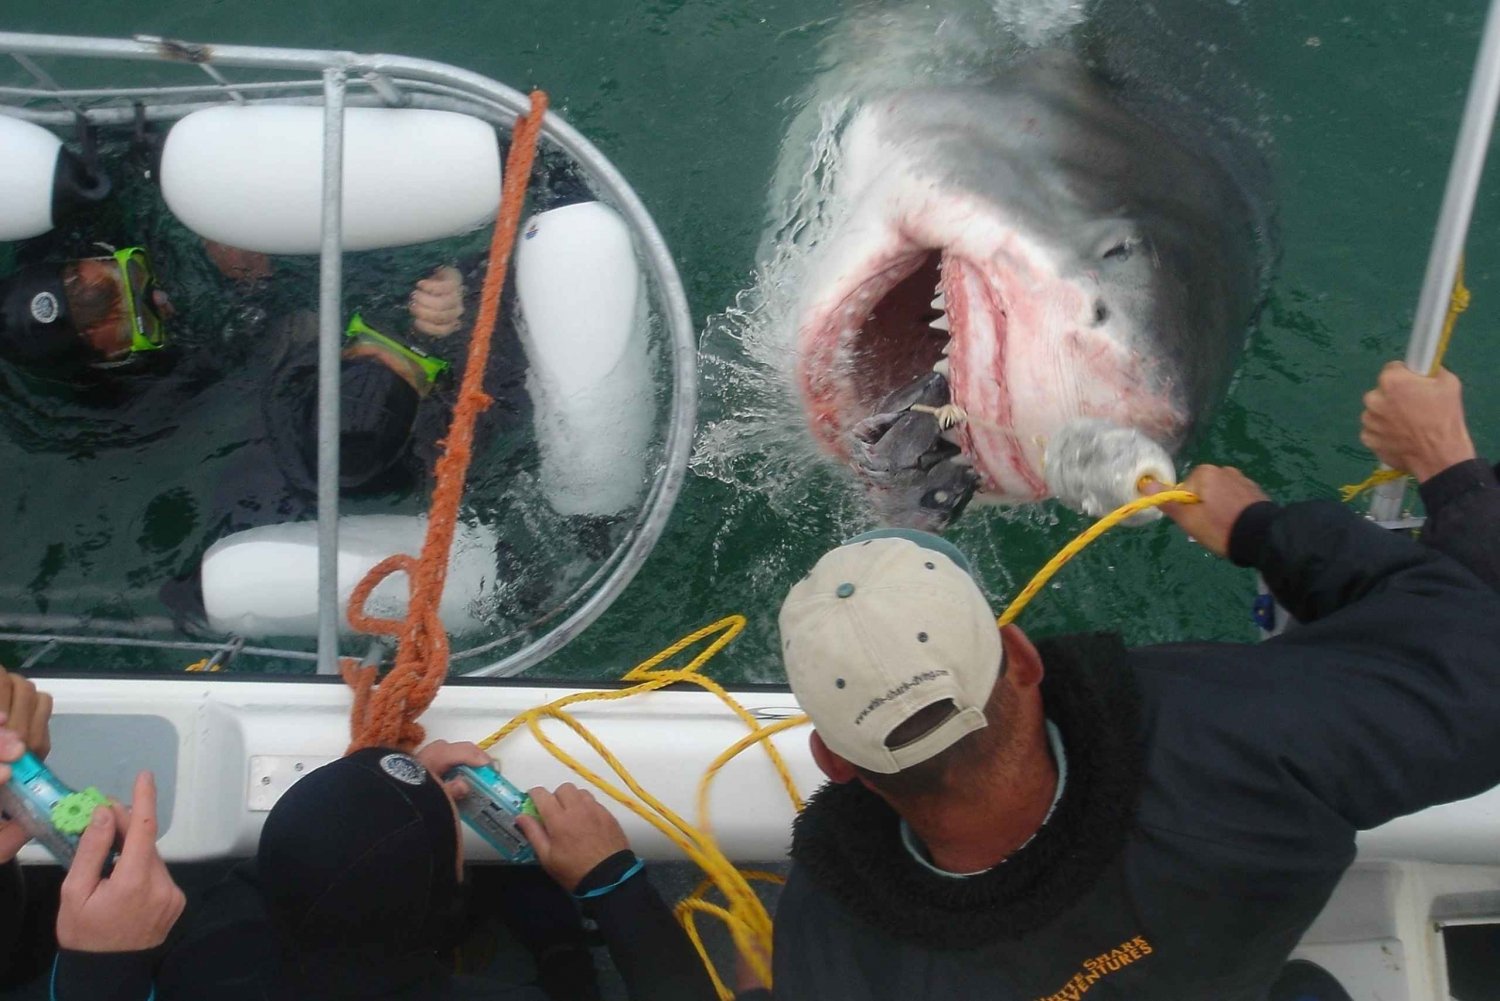 From Cape Town or Hermanus: Shark Cage Dive Boat Cruise